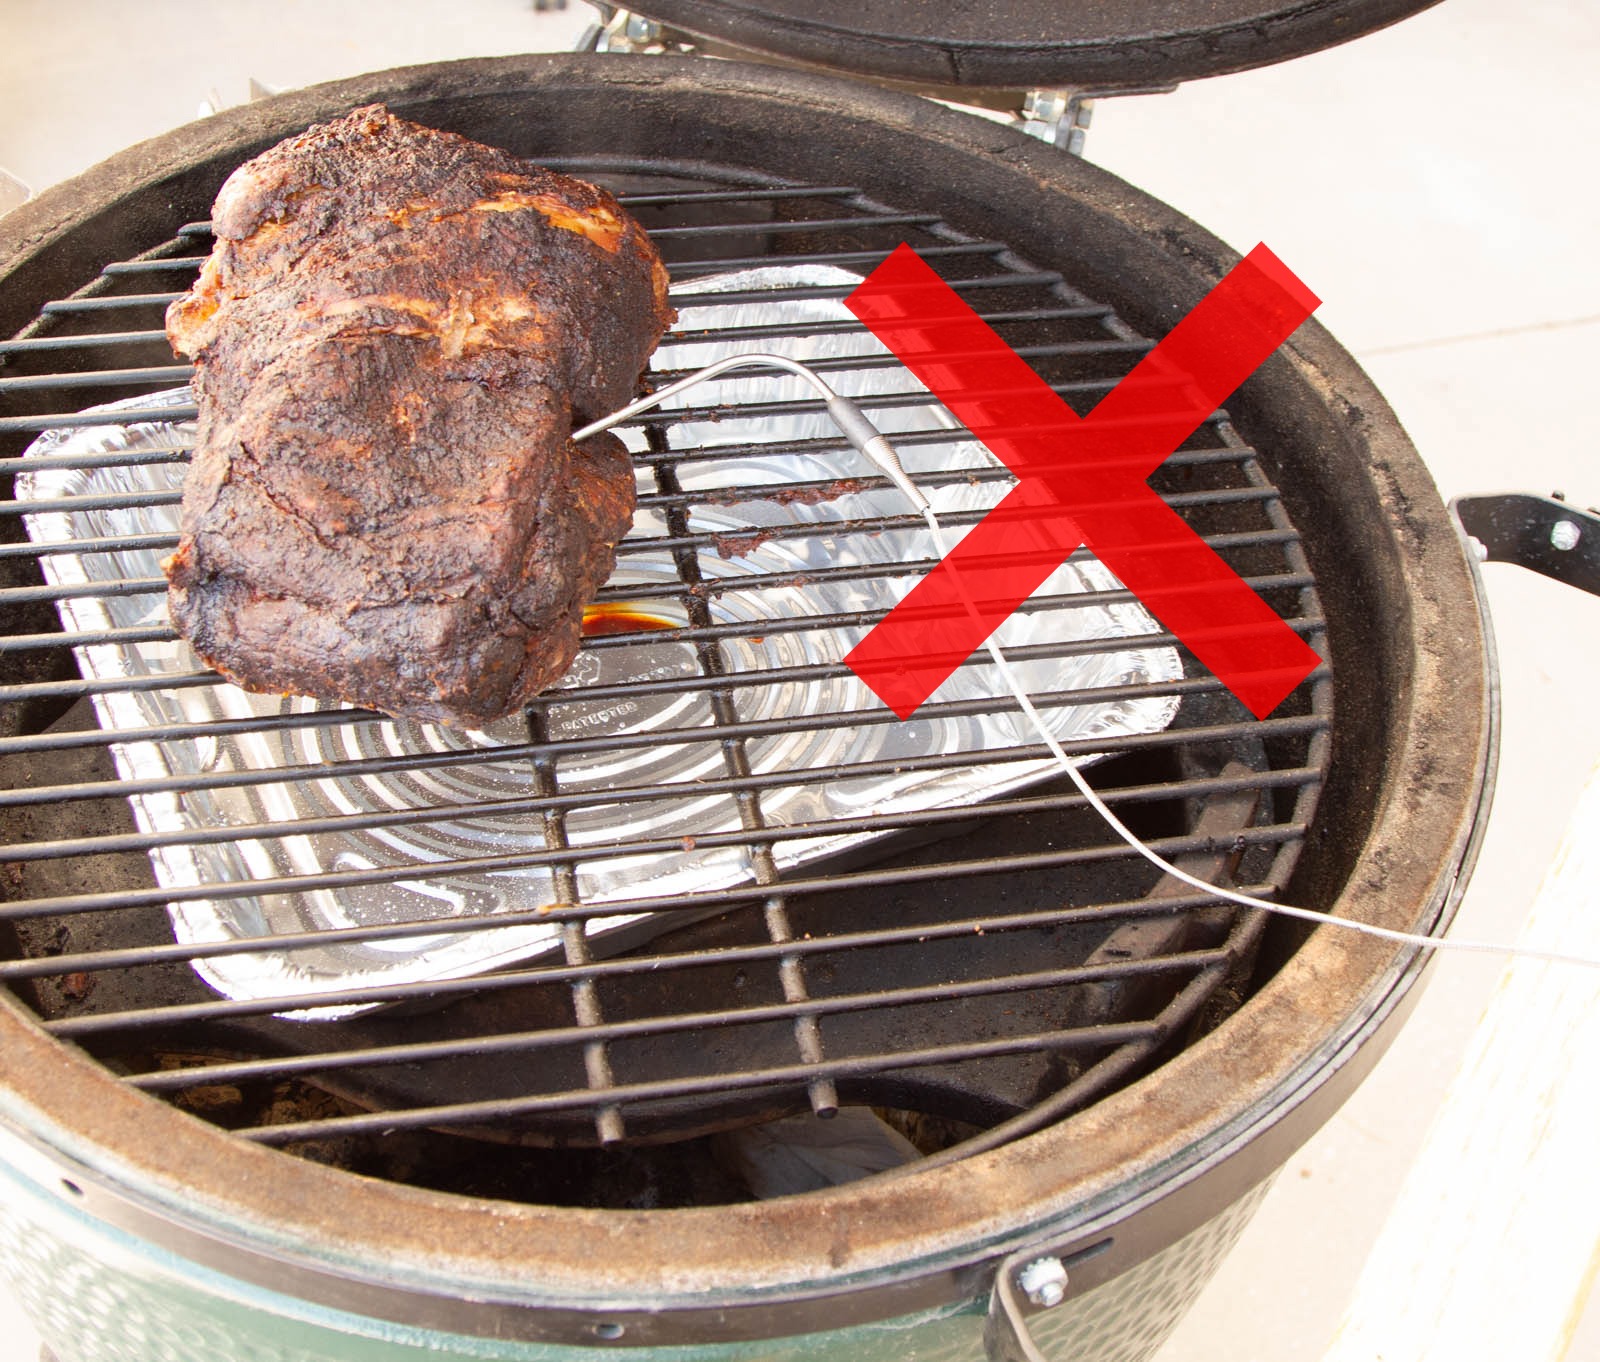 Safe Cooking Temperatures for Meats - Big Green Egg